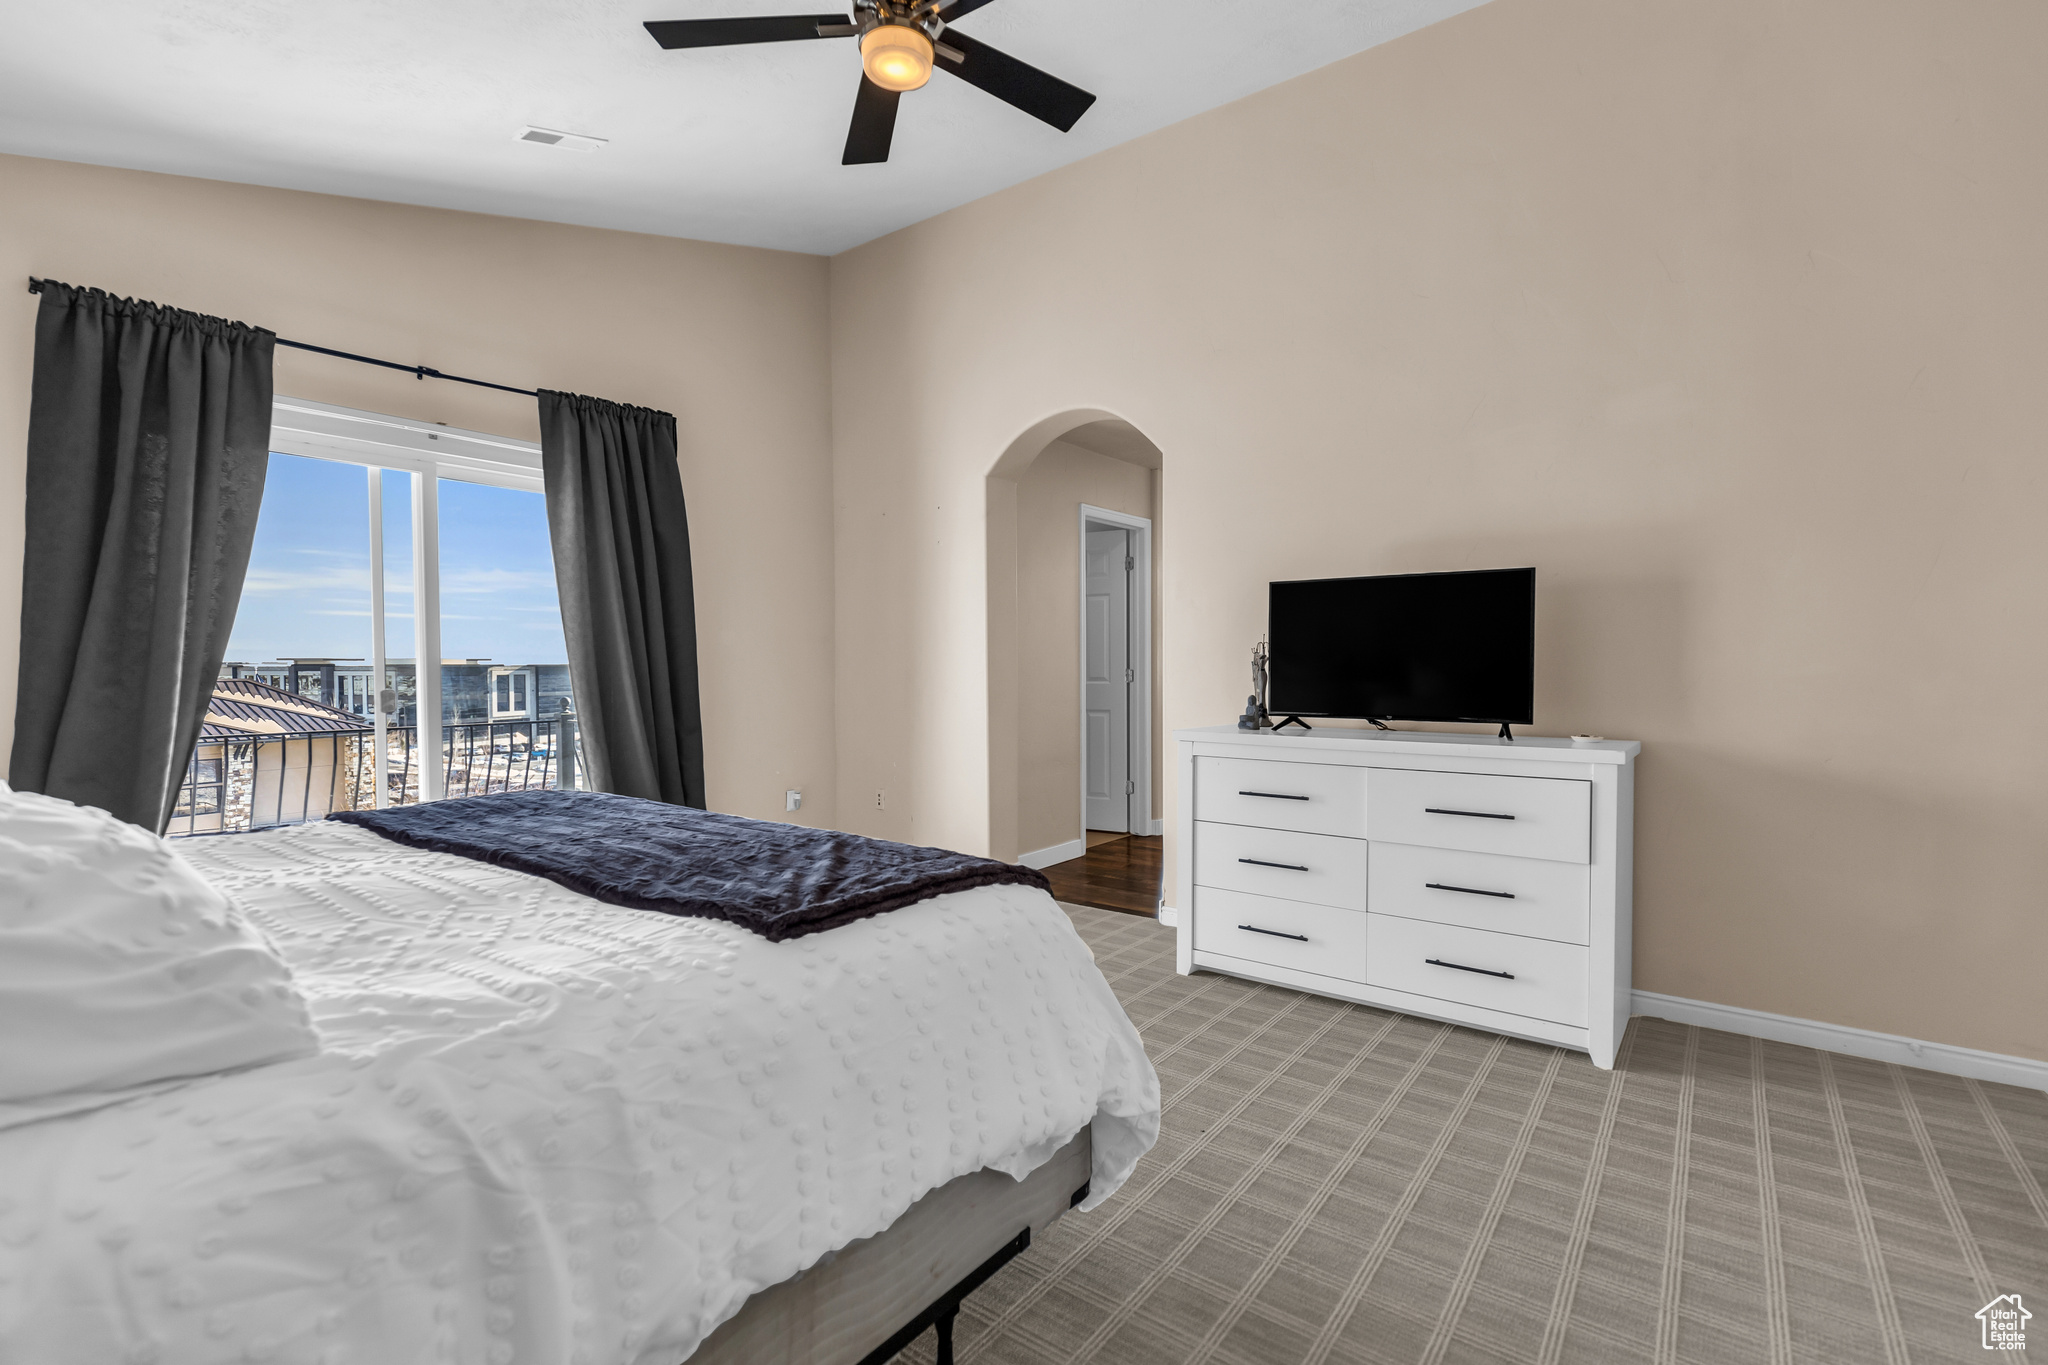 Bedroom with access to outside, ceiling fan, and vaulted ceiling